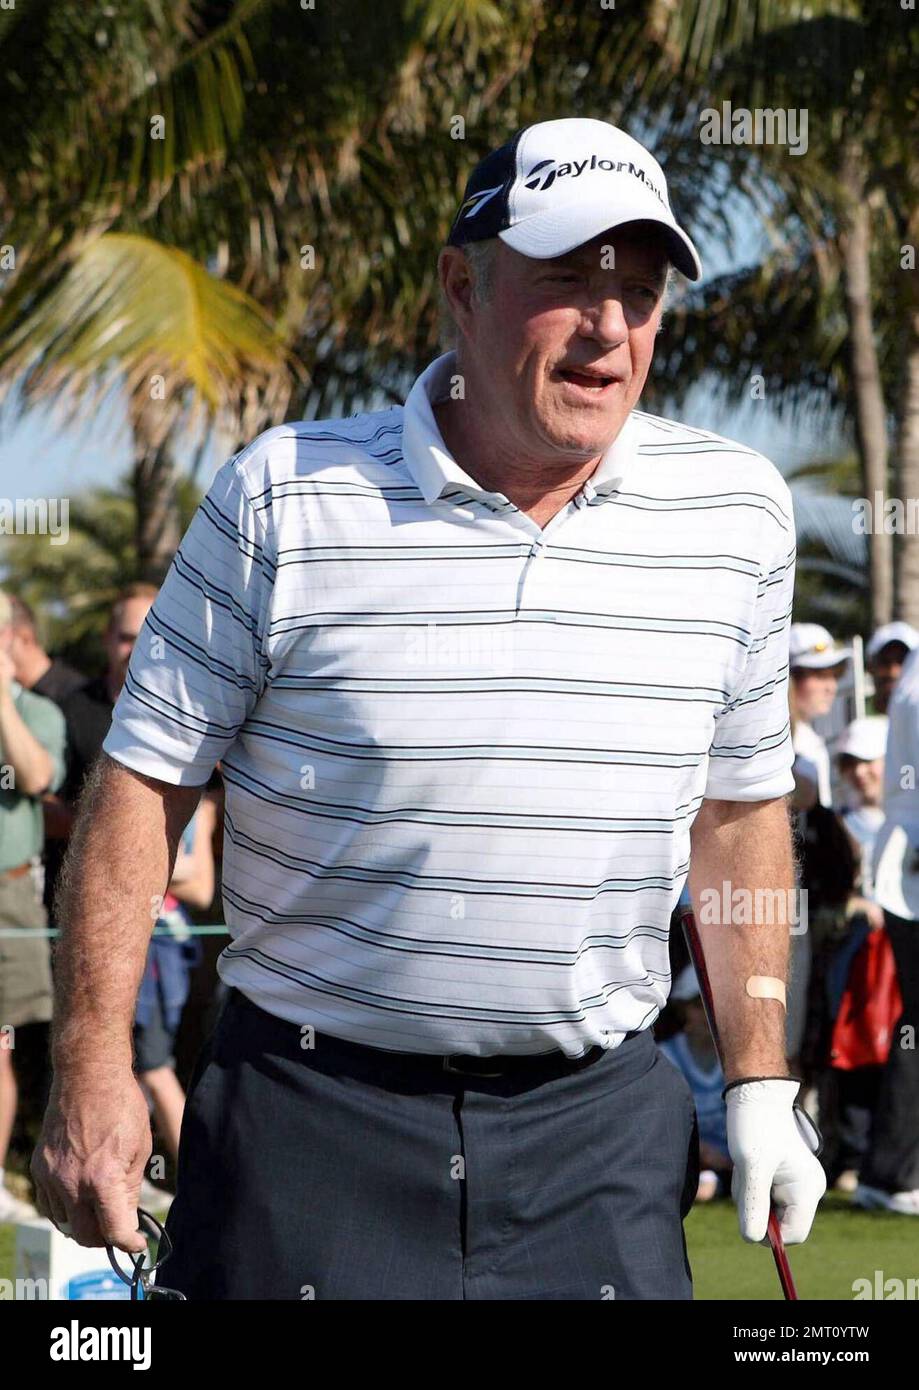 Exclusive!! James Caan plays on day three of The Michael Jordan Celebrity Invitational golf tournament held at the luxurious One and Only Ocean Club Golf Course on Paradise Island. At one point, Young hit one into the rough which, in this case, was the beach on the other side of a wall! He worked very hard to get it back onto the course. At least it didn't end up in the ocean. The MJCI organization brings in an incredible array of talent from the worlds of sport and entertainment to compete on the course and participate in various events for charity in this annual event.  In it's seventh year Stock Photo